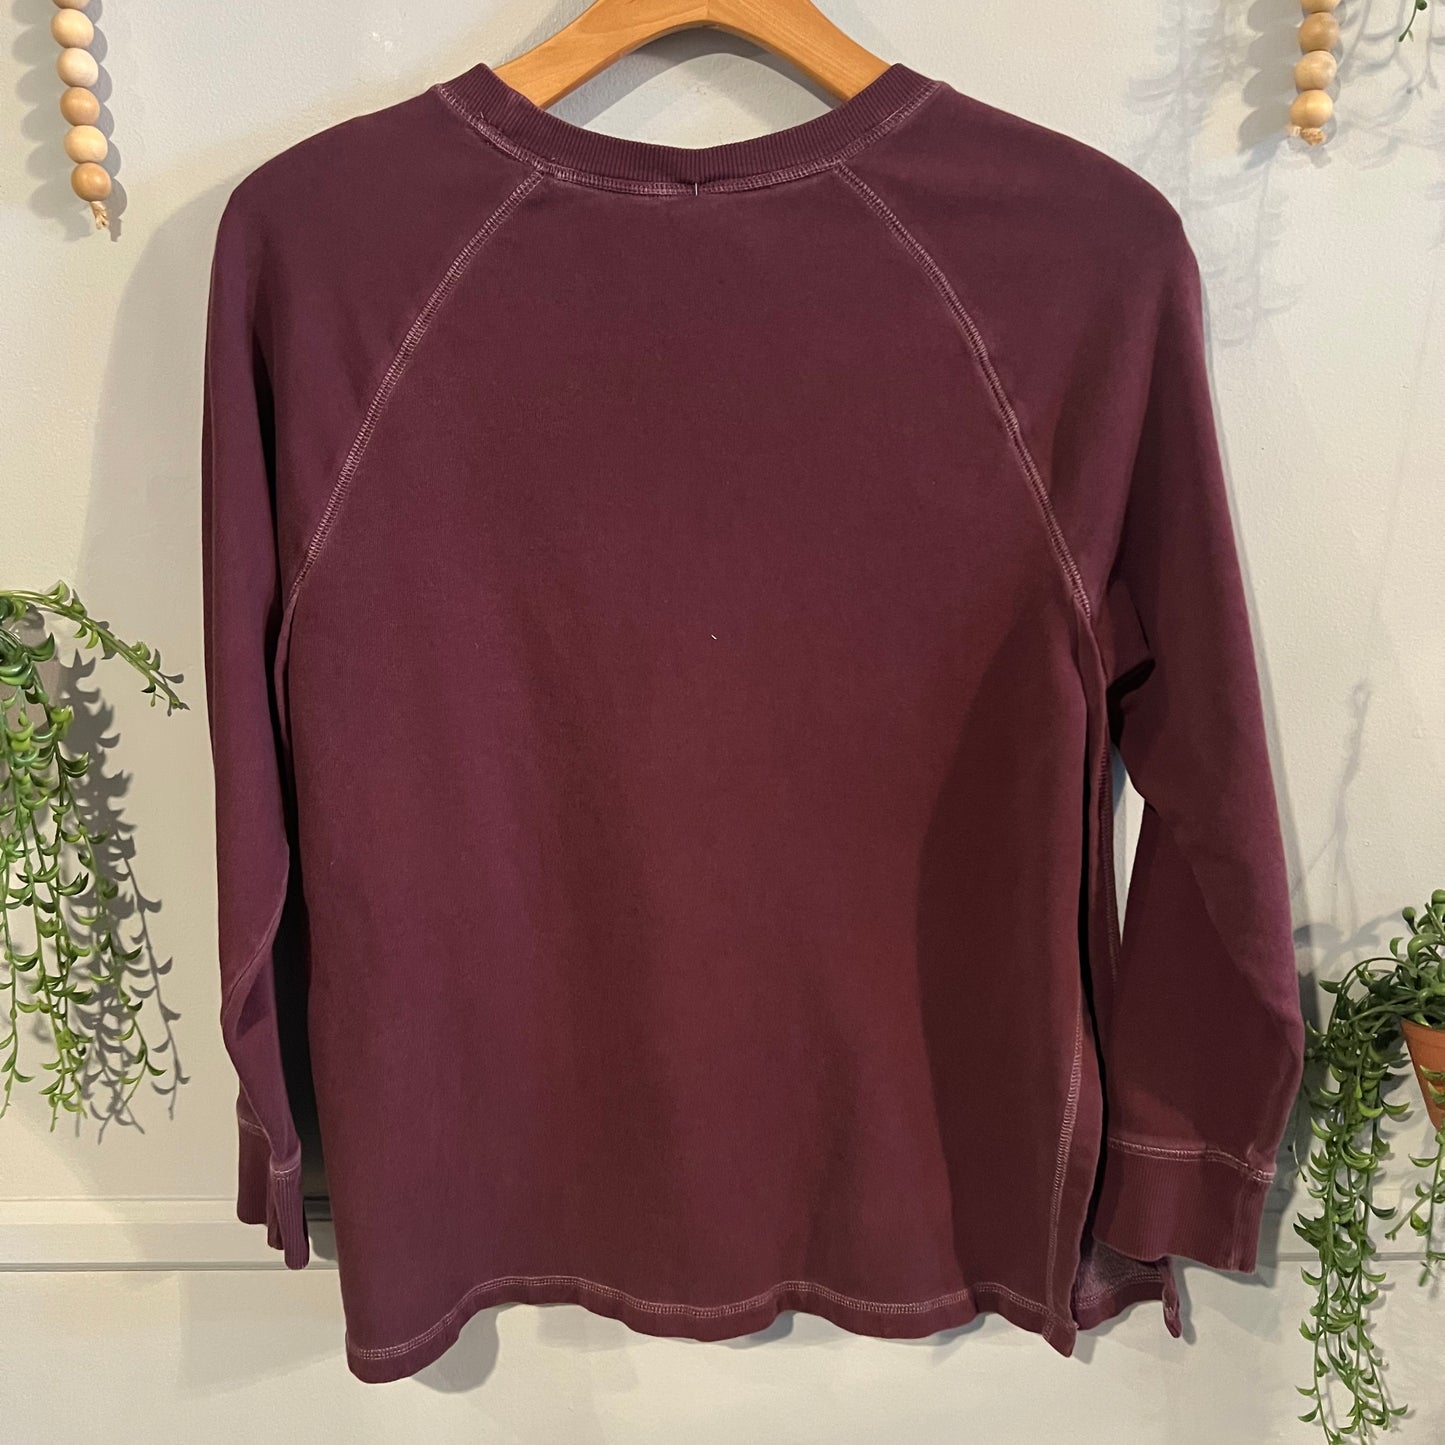 'Snacking for two' graphic sweatshirt, Mauve